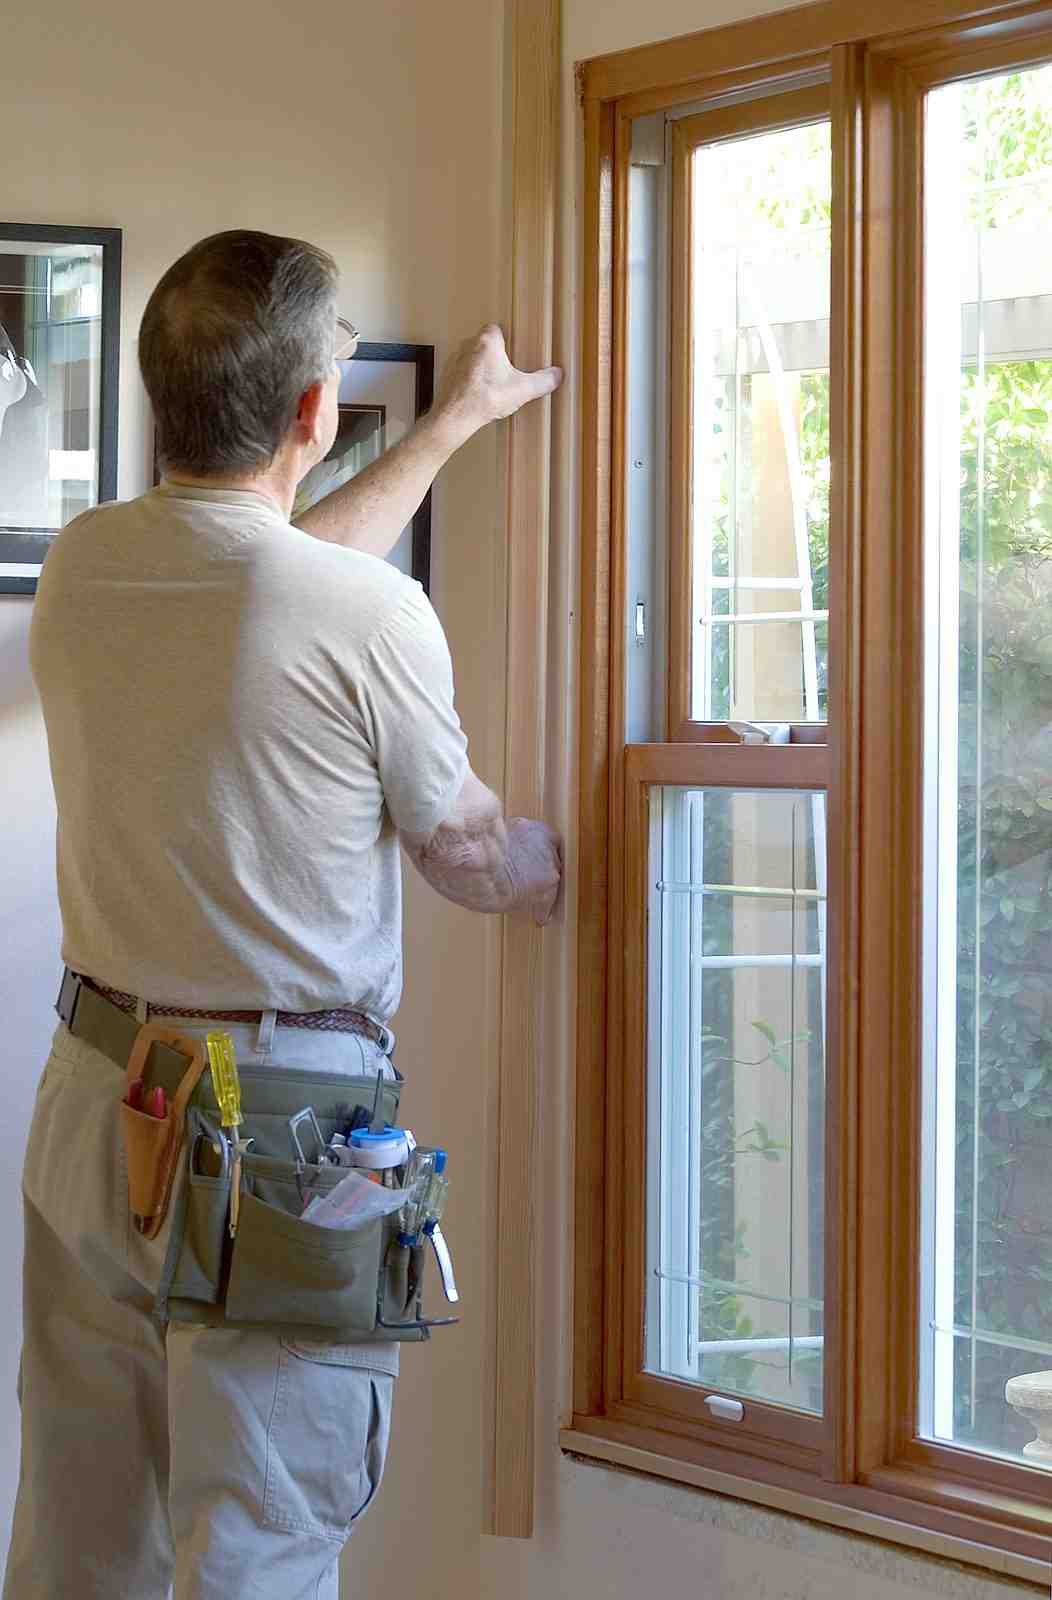 What is the advantage of double hung windows?